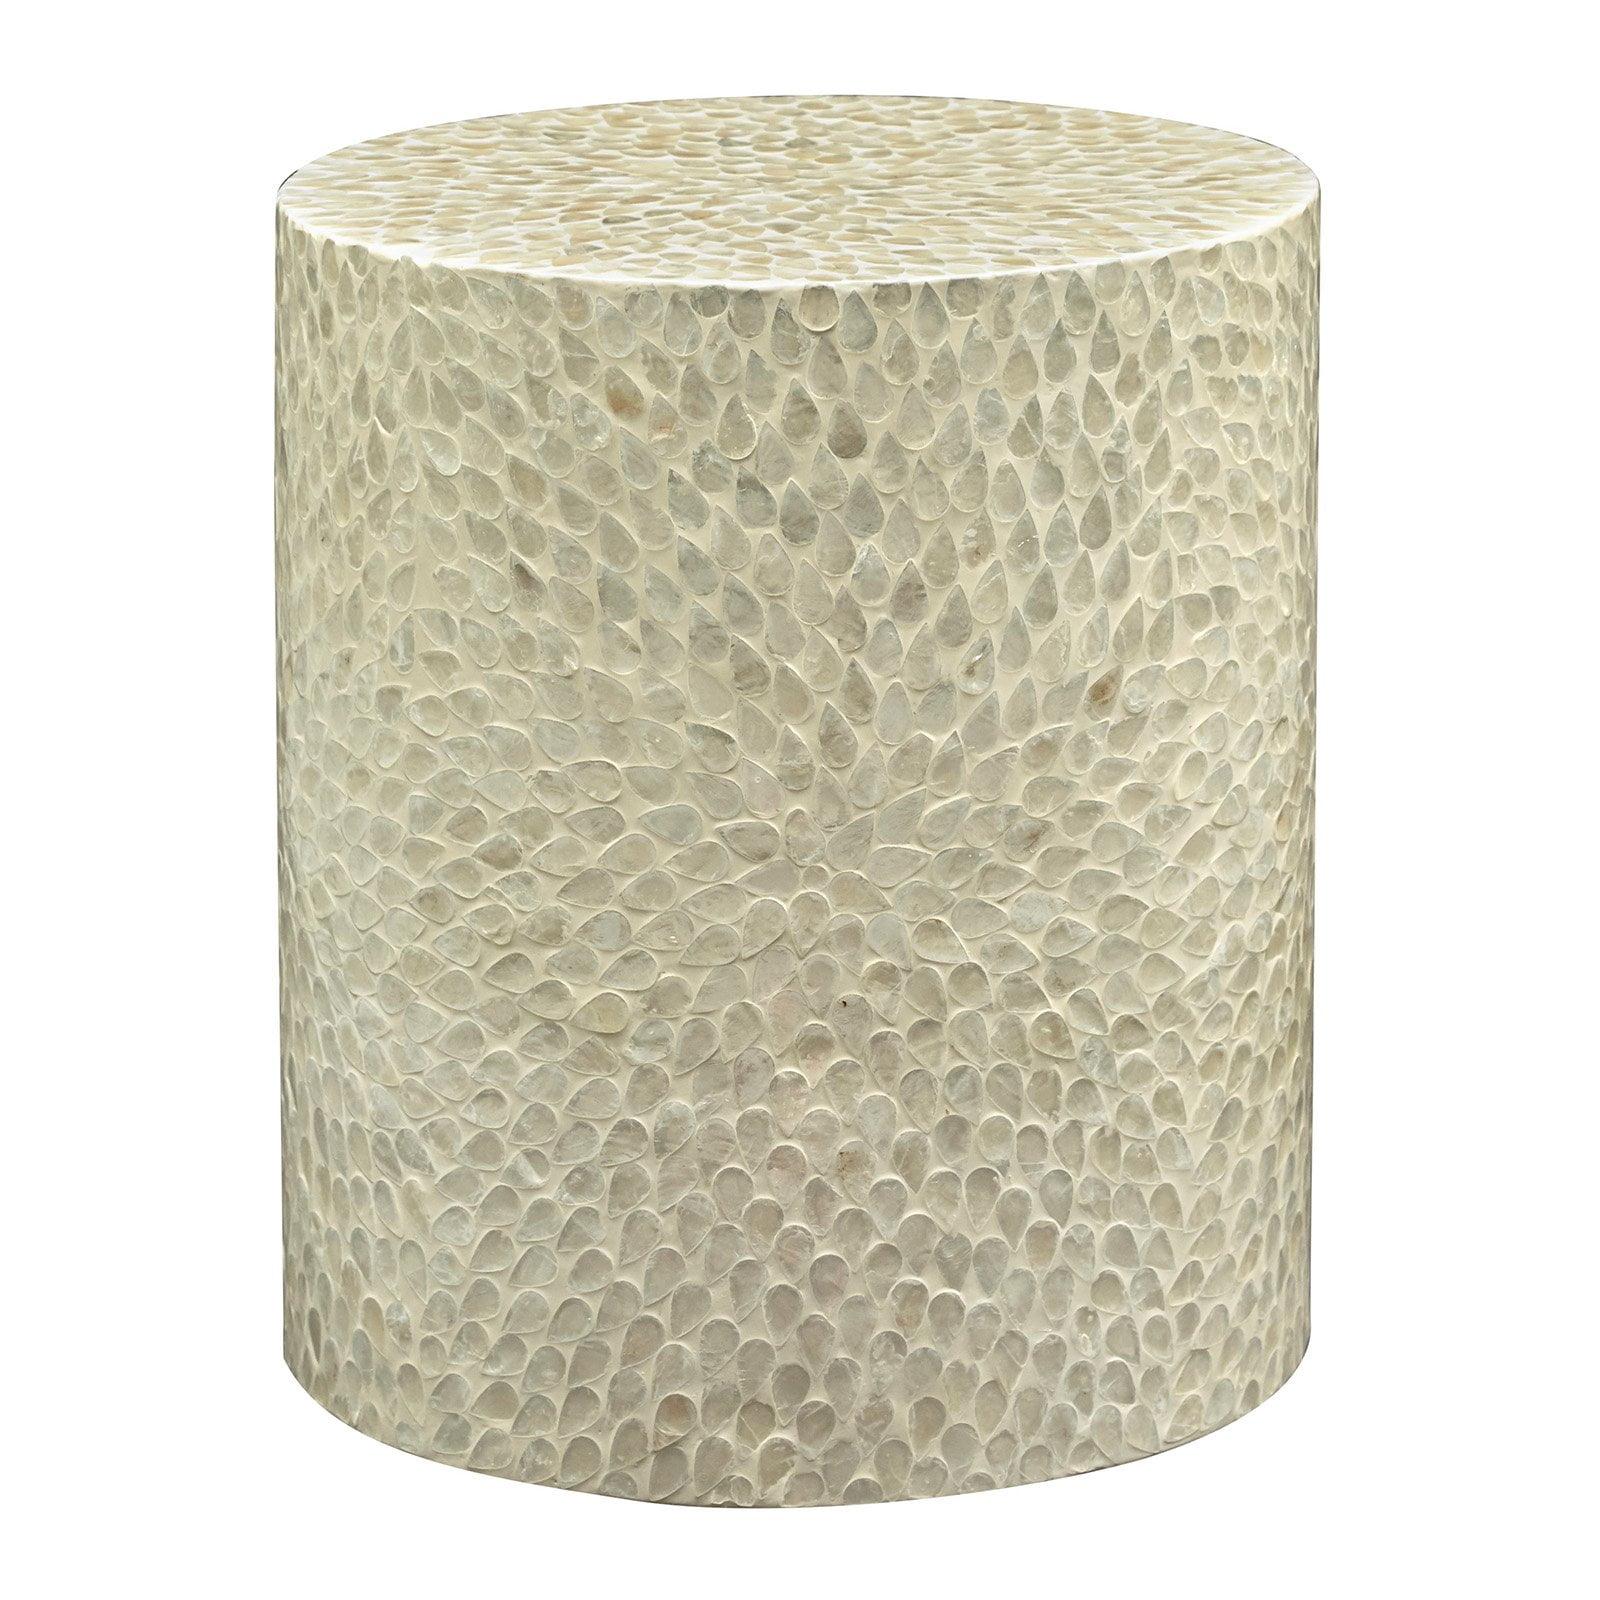 Transitional White Capiz Shell Round Accent Table, 16"